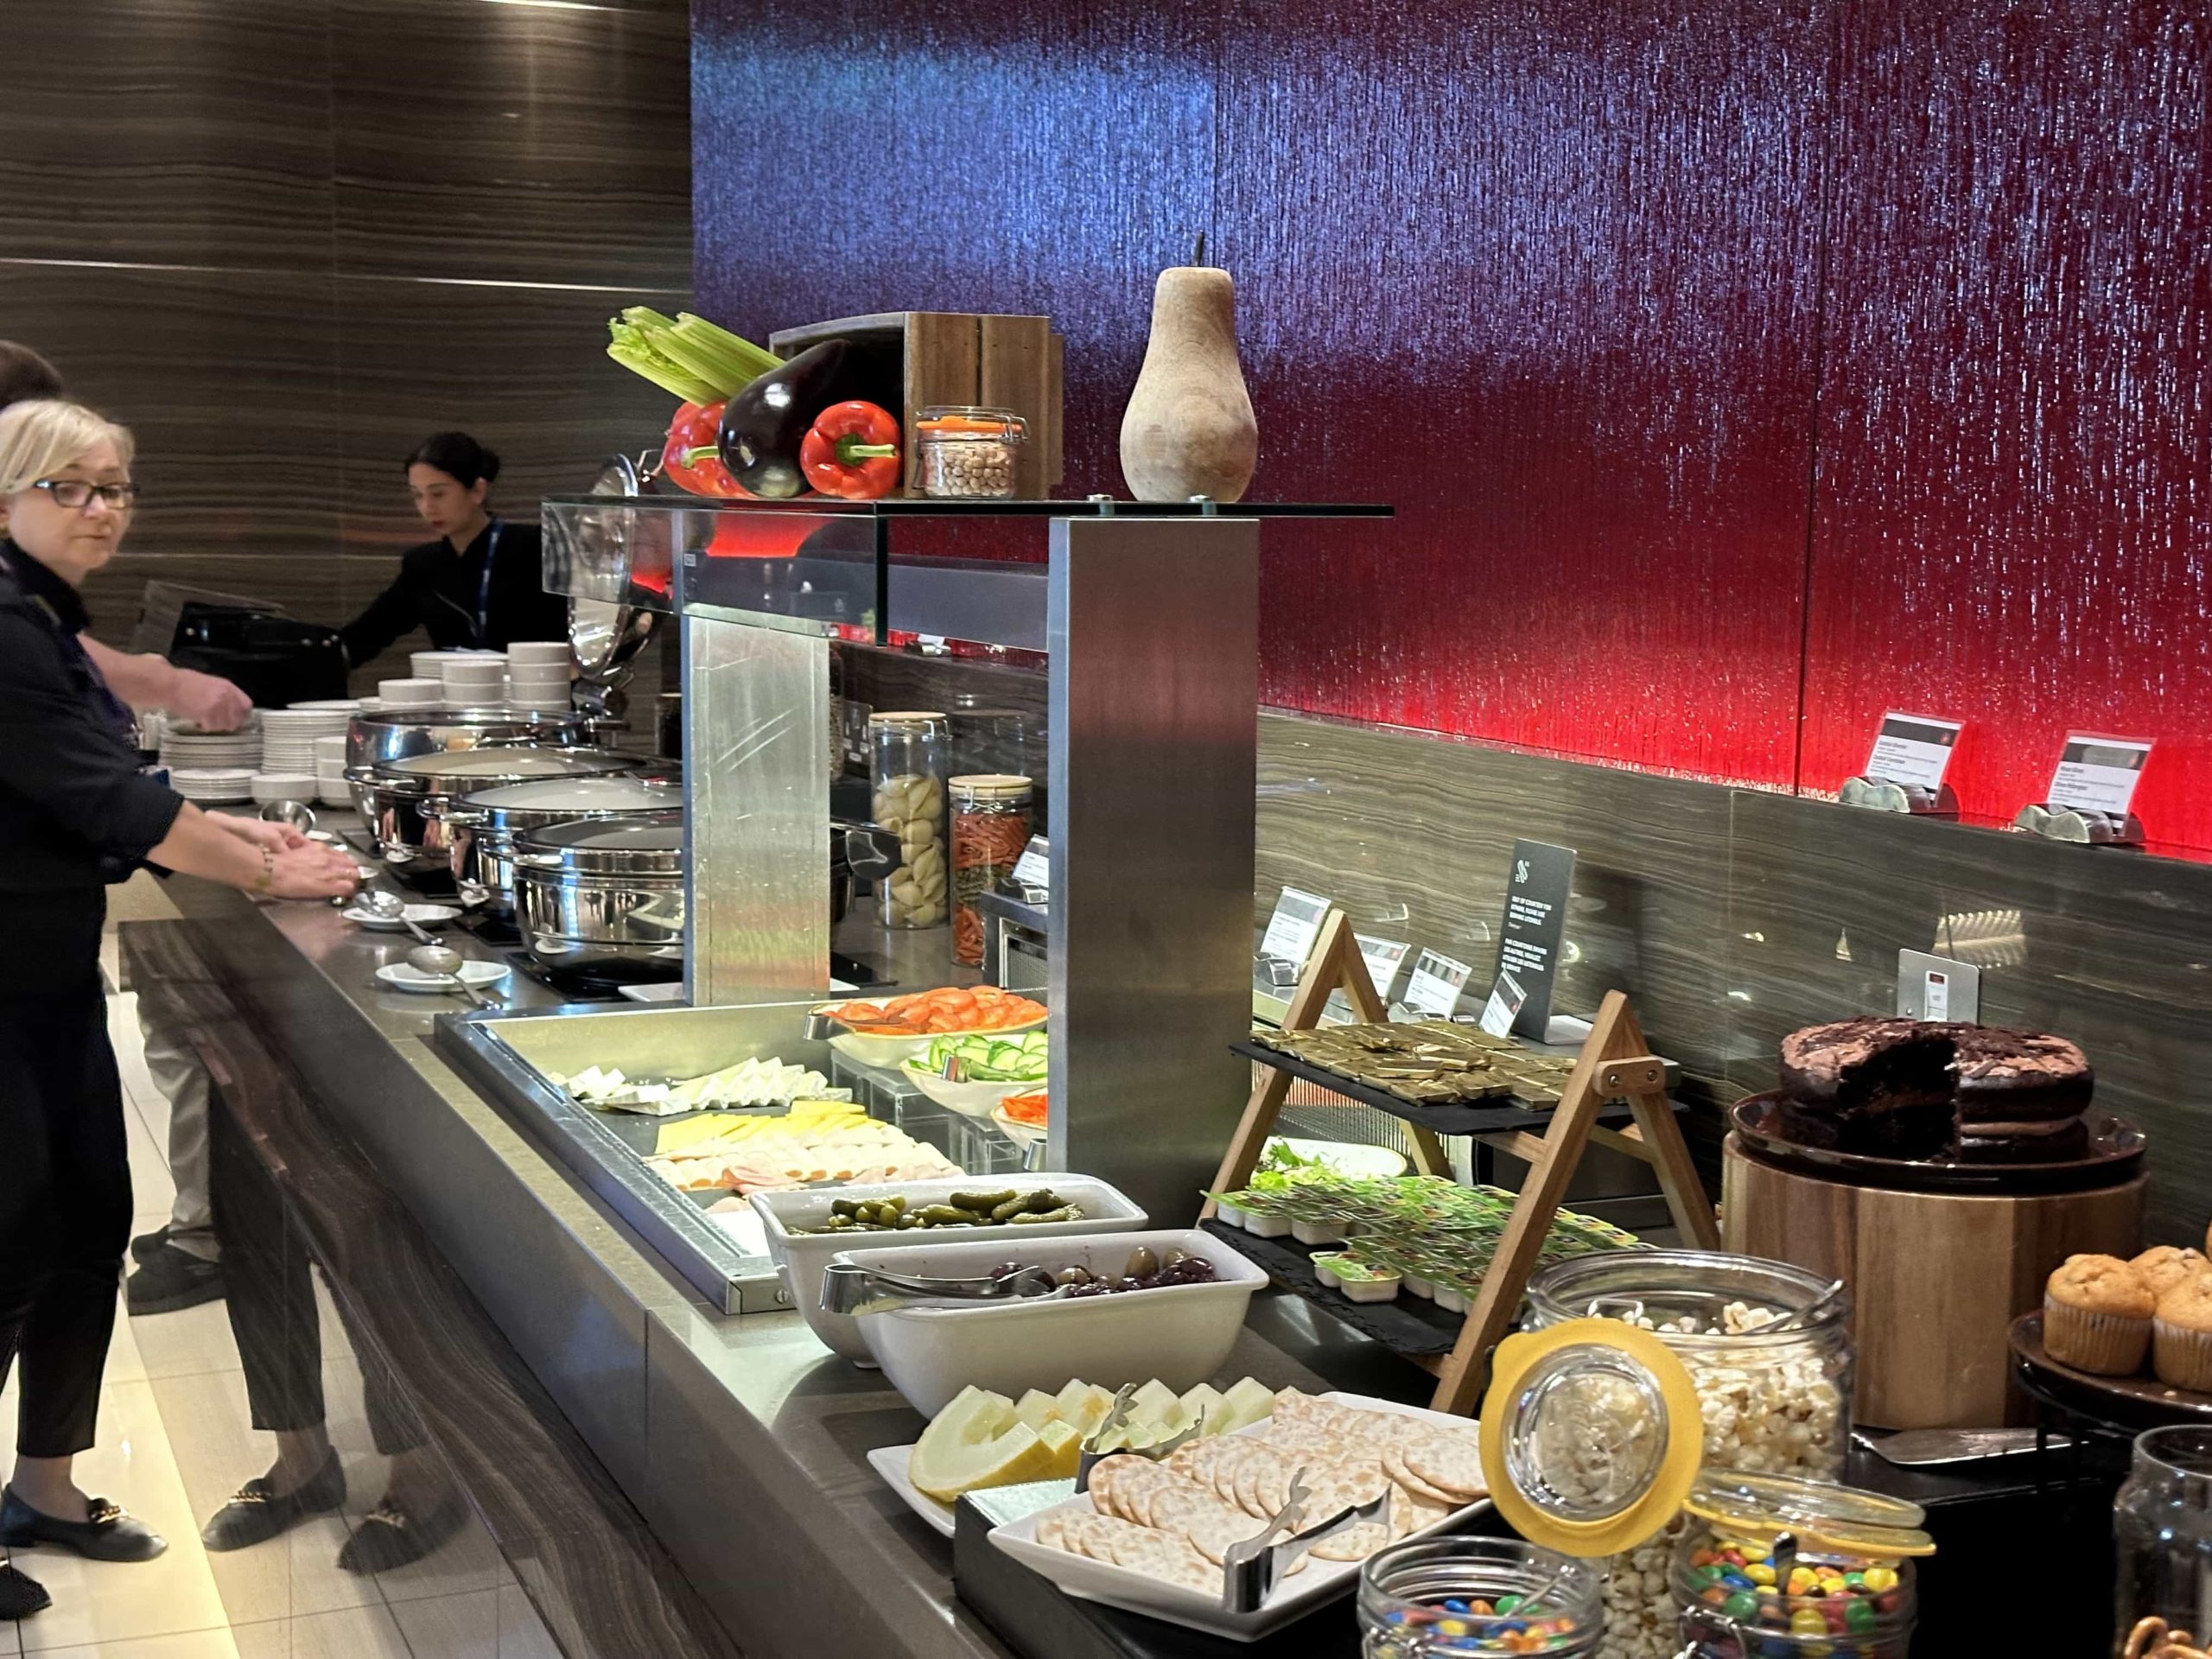 A buffet setup with hot food items, salad options, snacks, and desserts